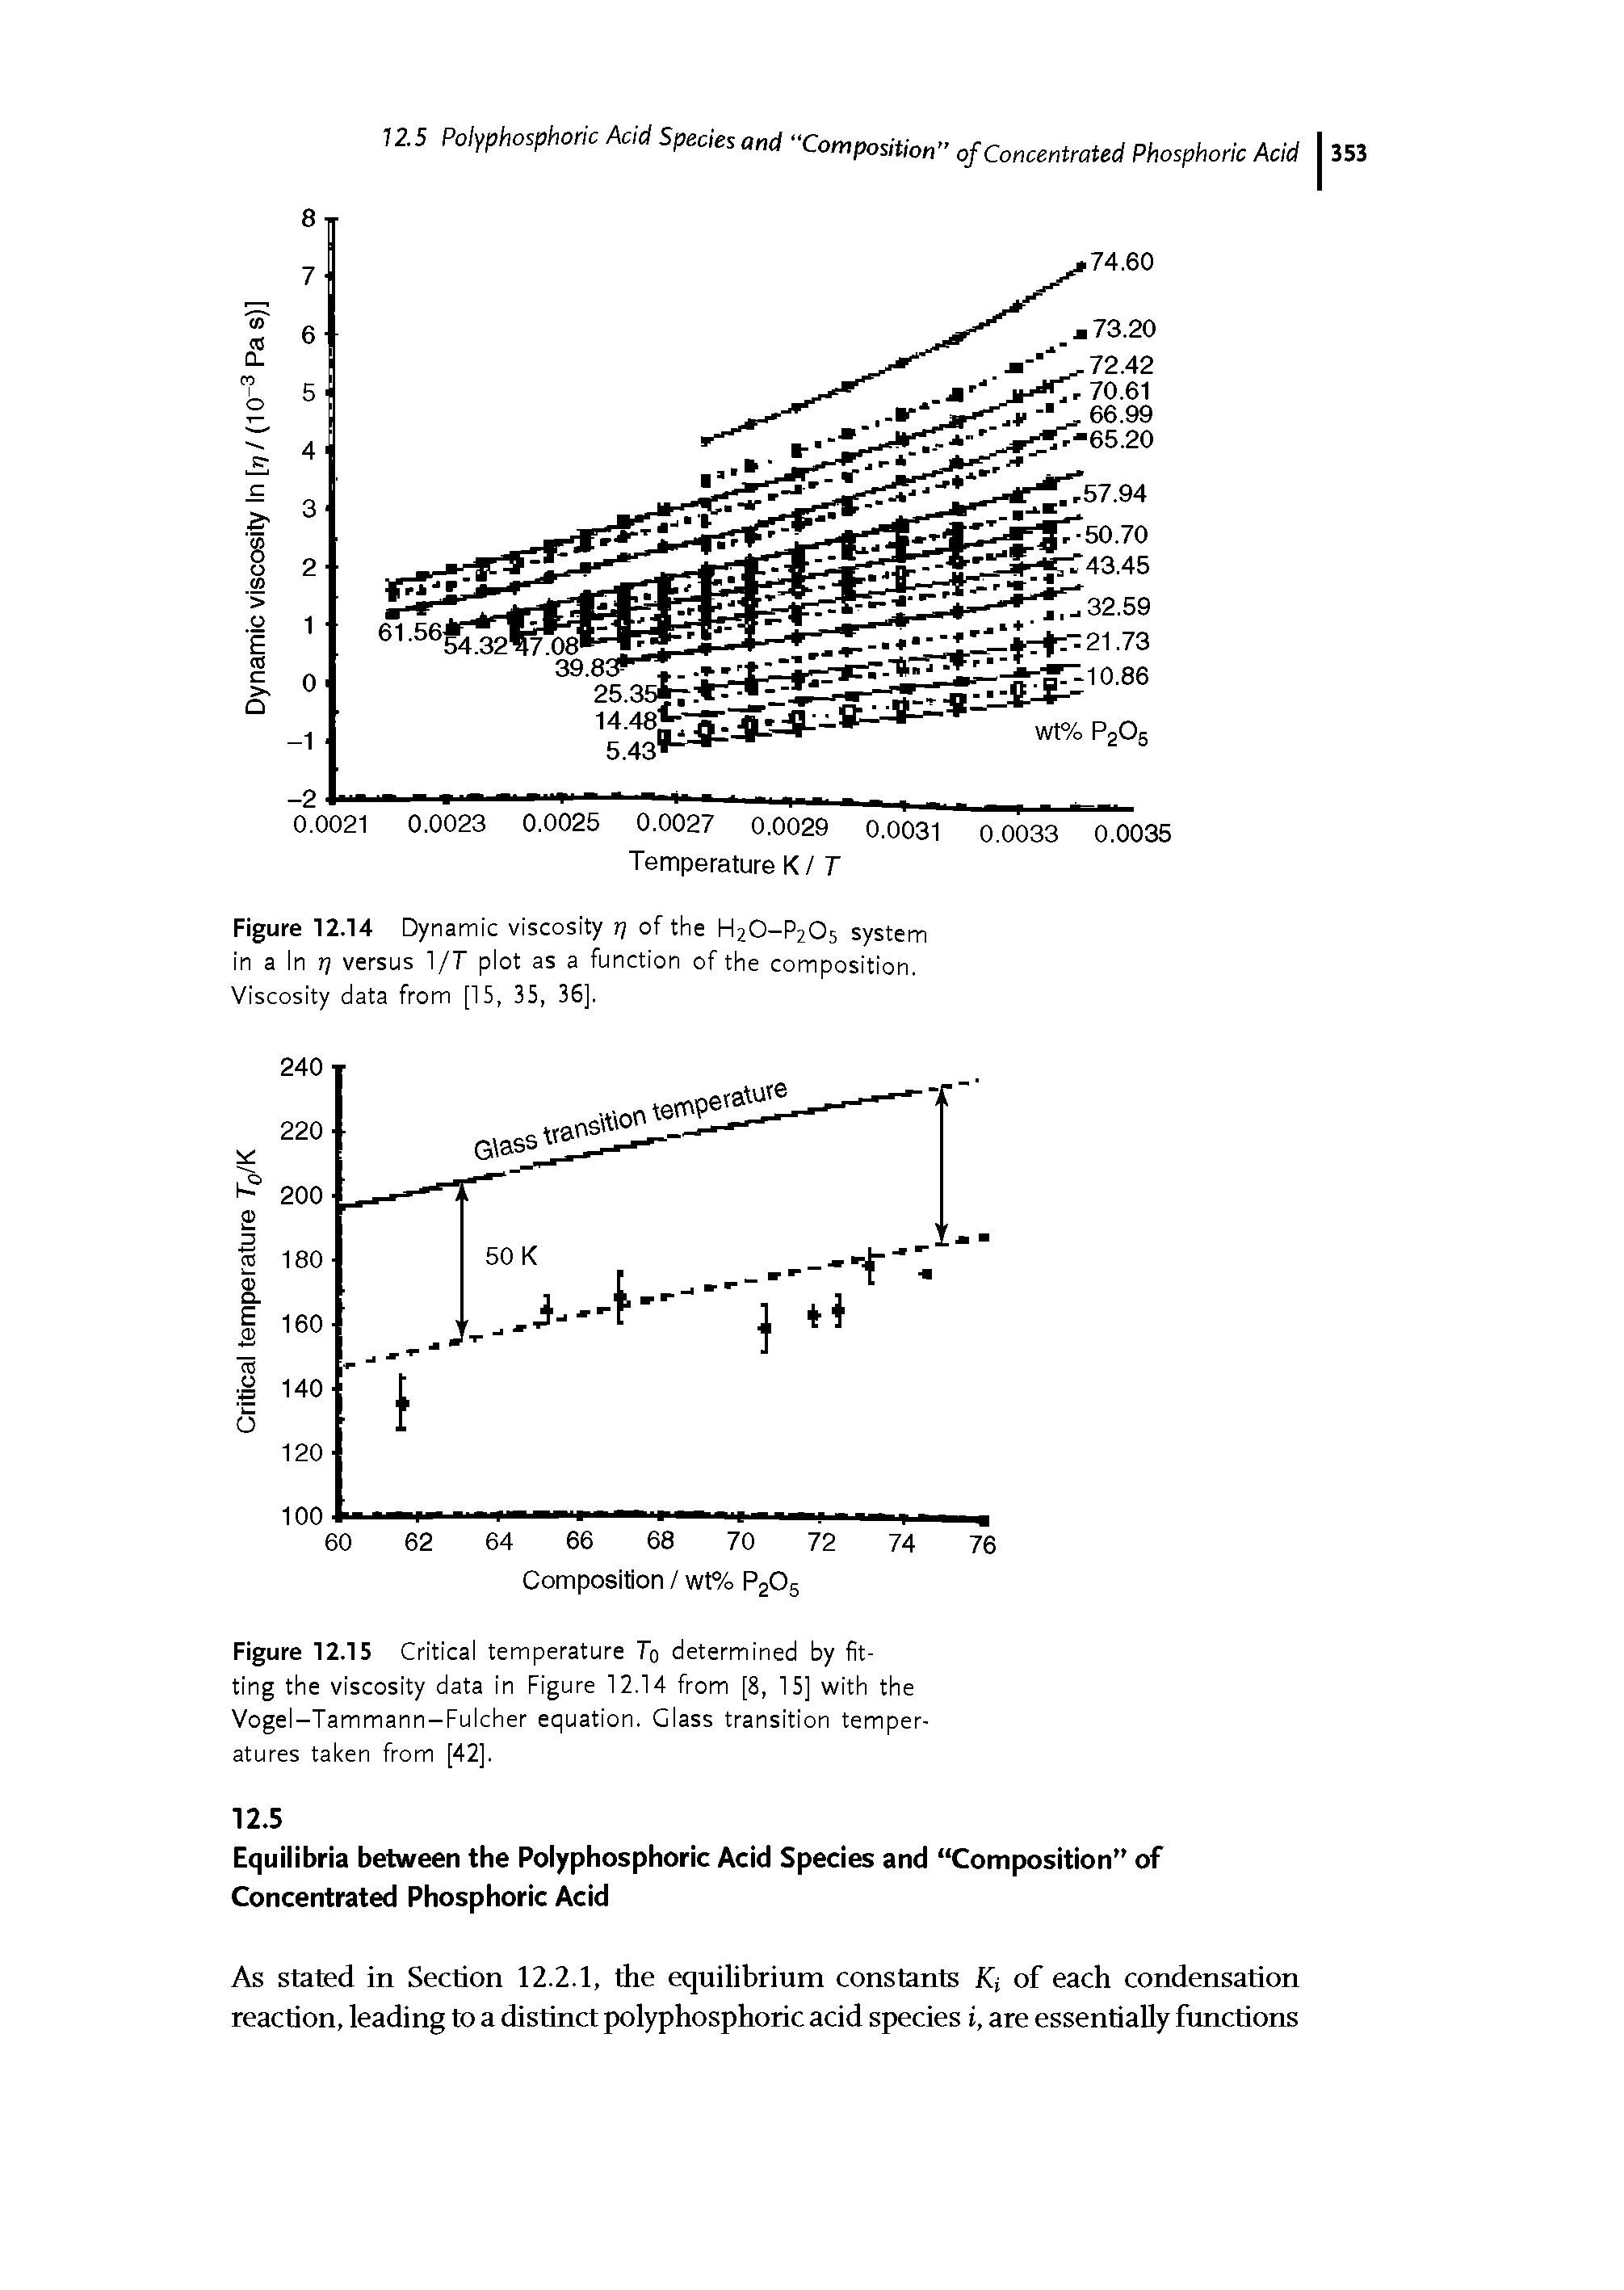 Figure 12.15 Critical temperature To determined by fitting the viscosity data in Figure 12.14 from [8, 15] with the Vogel-Tammann-Fulcher equation. Glass transition temperatures taken from [42].